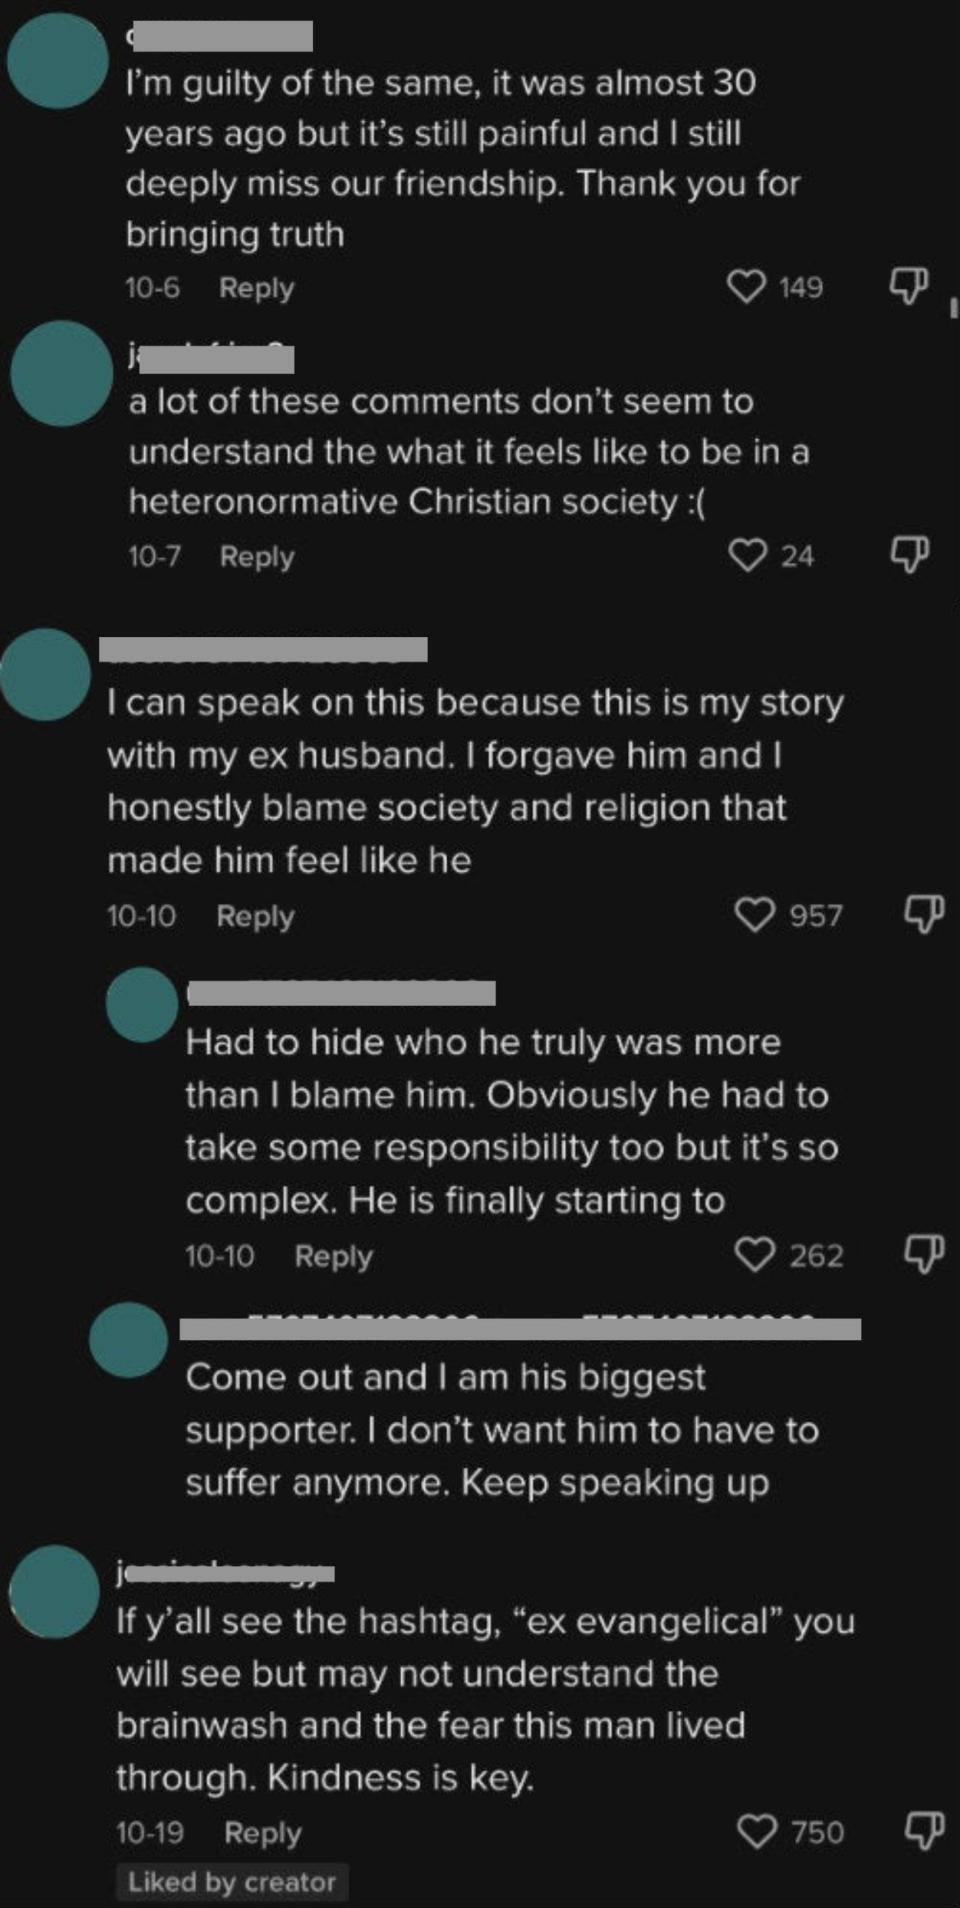 tiktok comments from people who can relate to abe's story